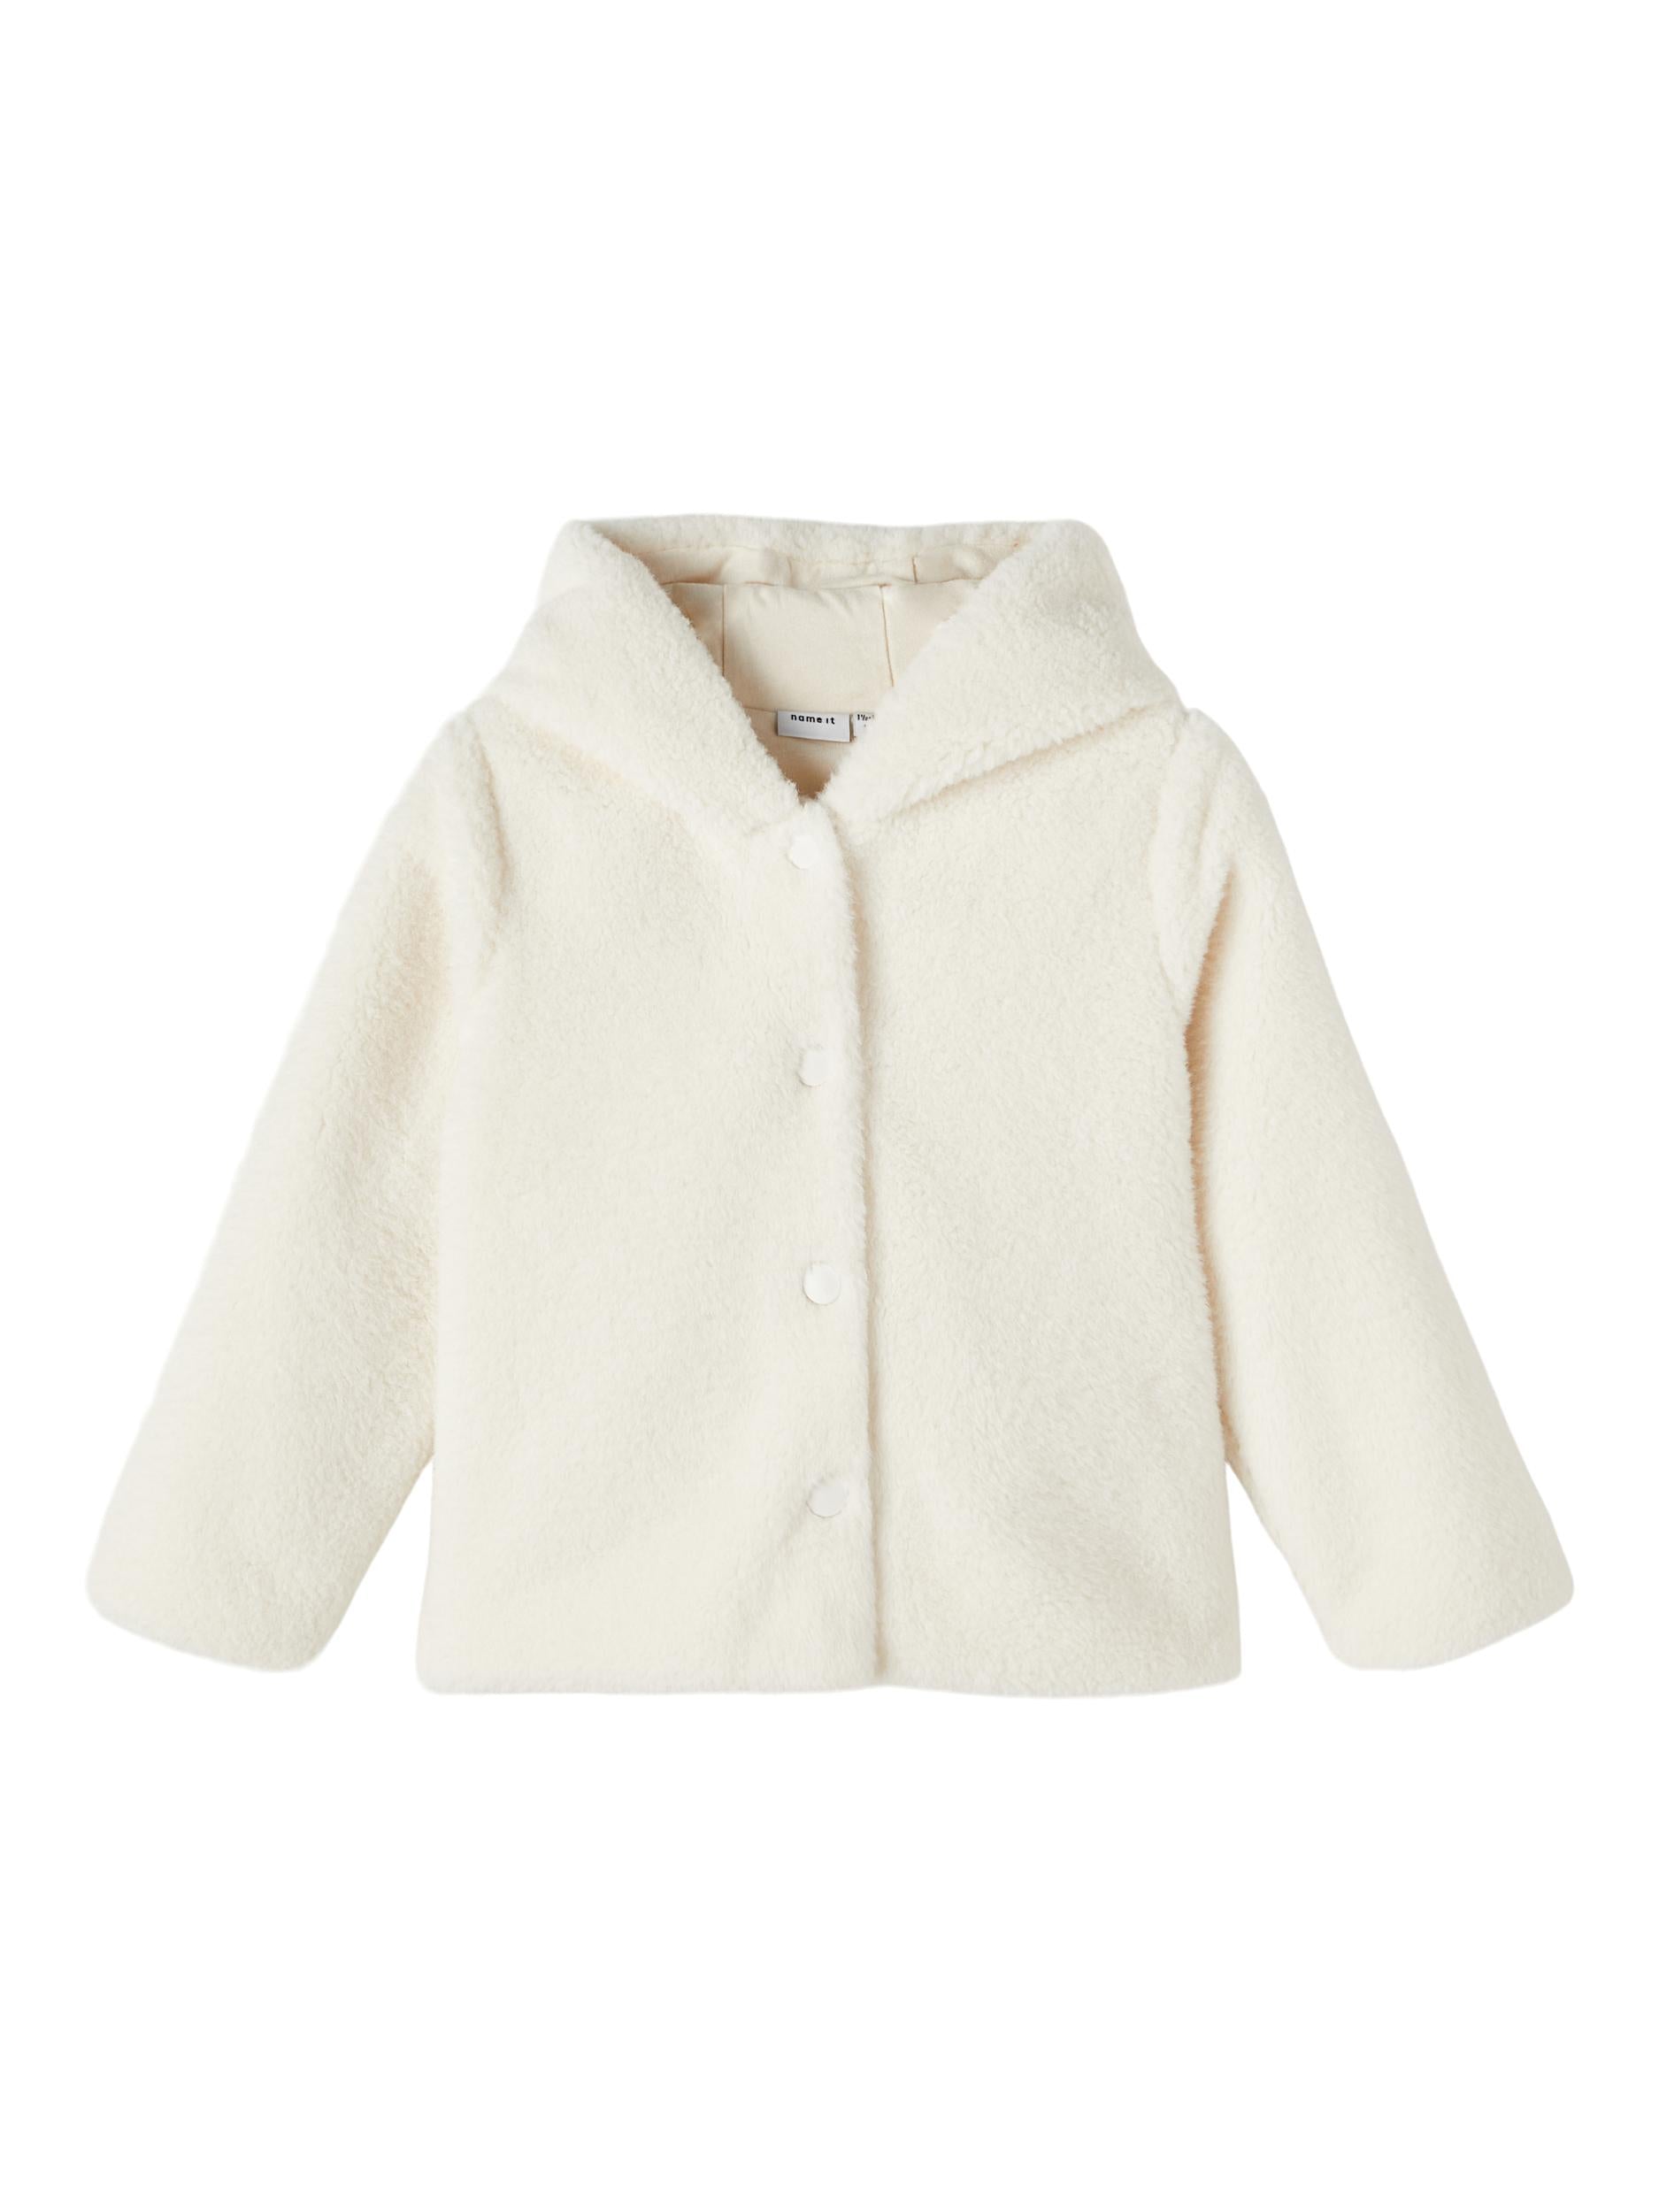 Girl's Olive Teddy Cardigan - Jet Stream-Front View